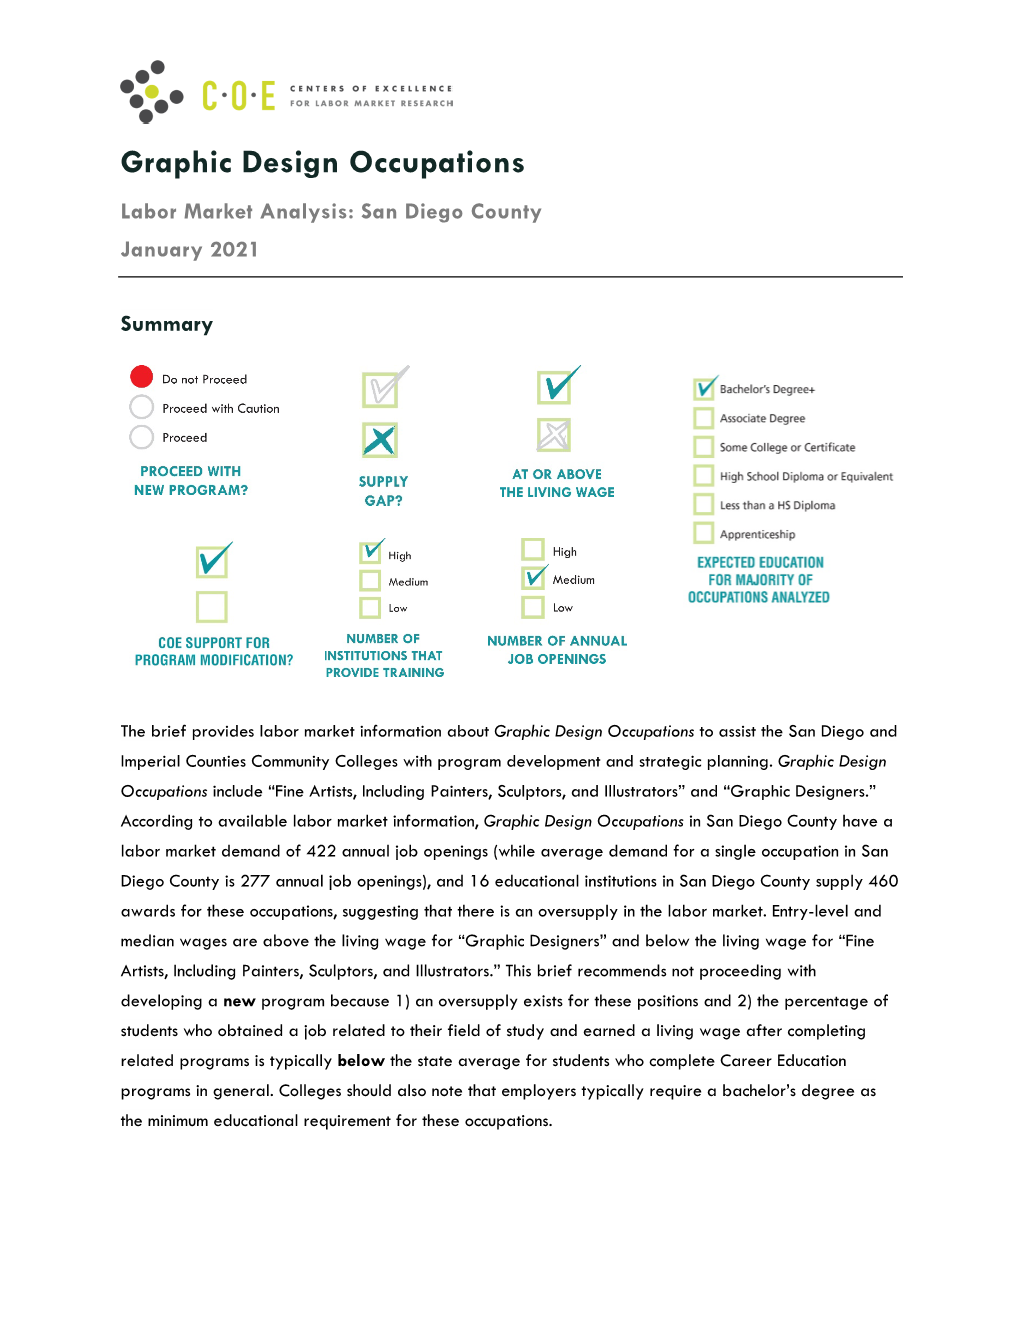 Graphic Design Occupations Labor Market Analysis: San Diego County January 2021